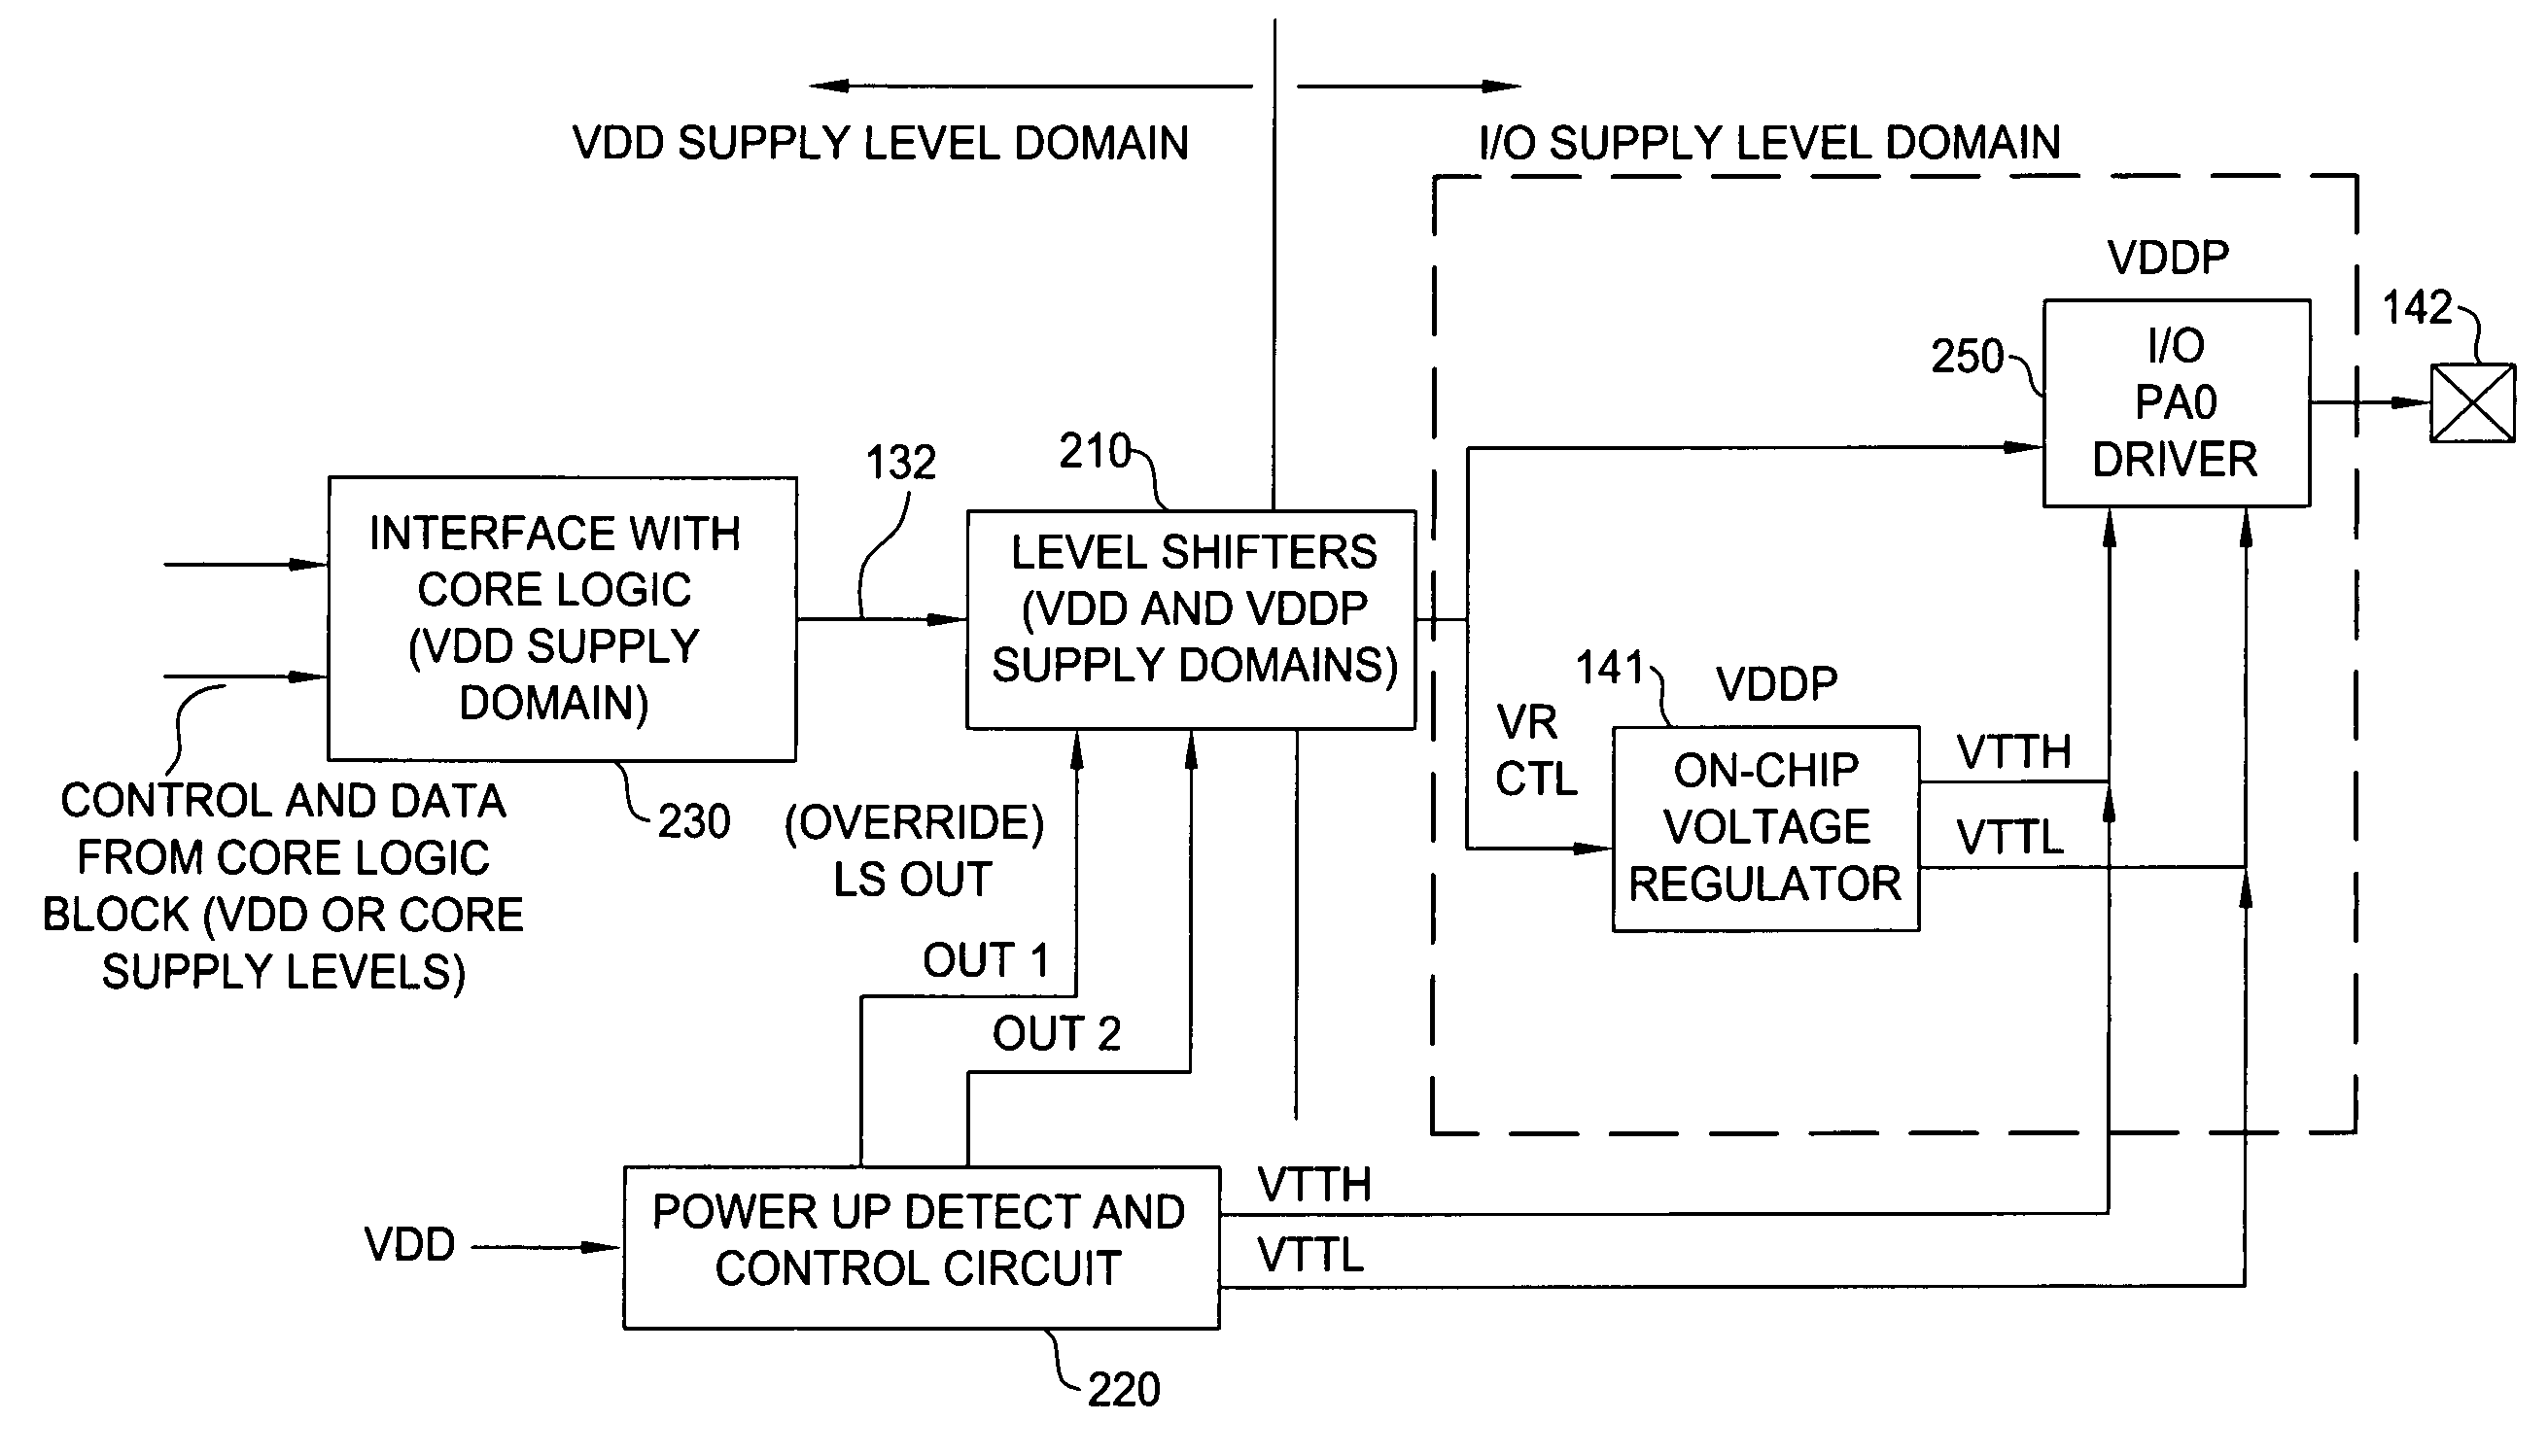 Circuit technique to prevent device overstress